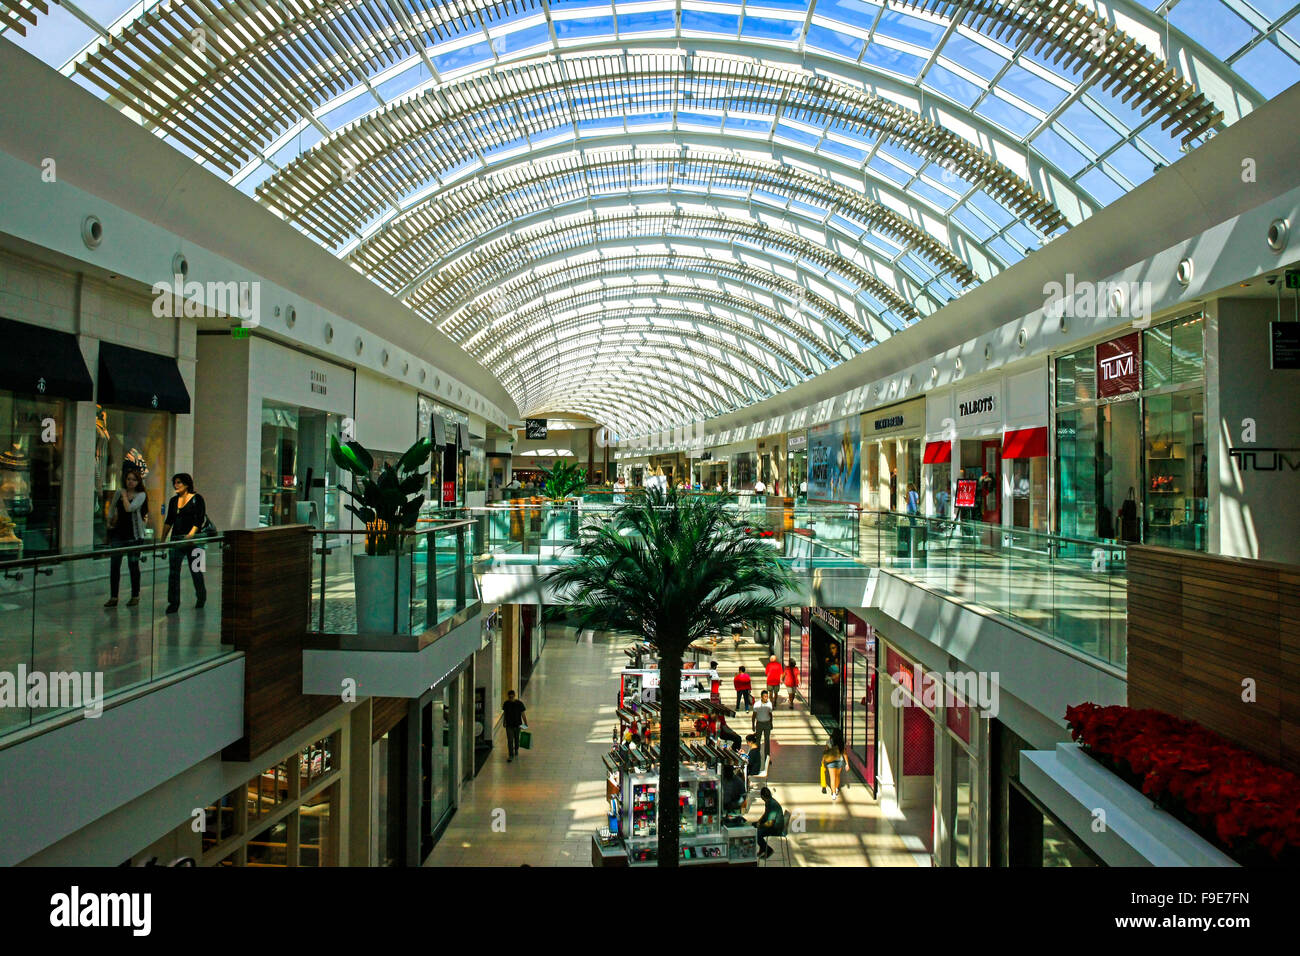 The air conditioned University Town Center Mall in Sarasota FL Stock Photo